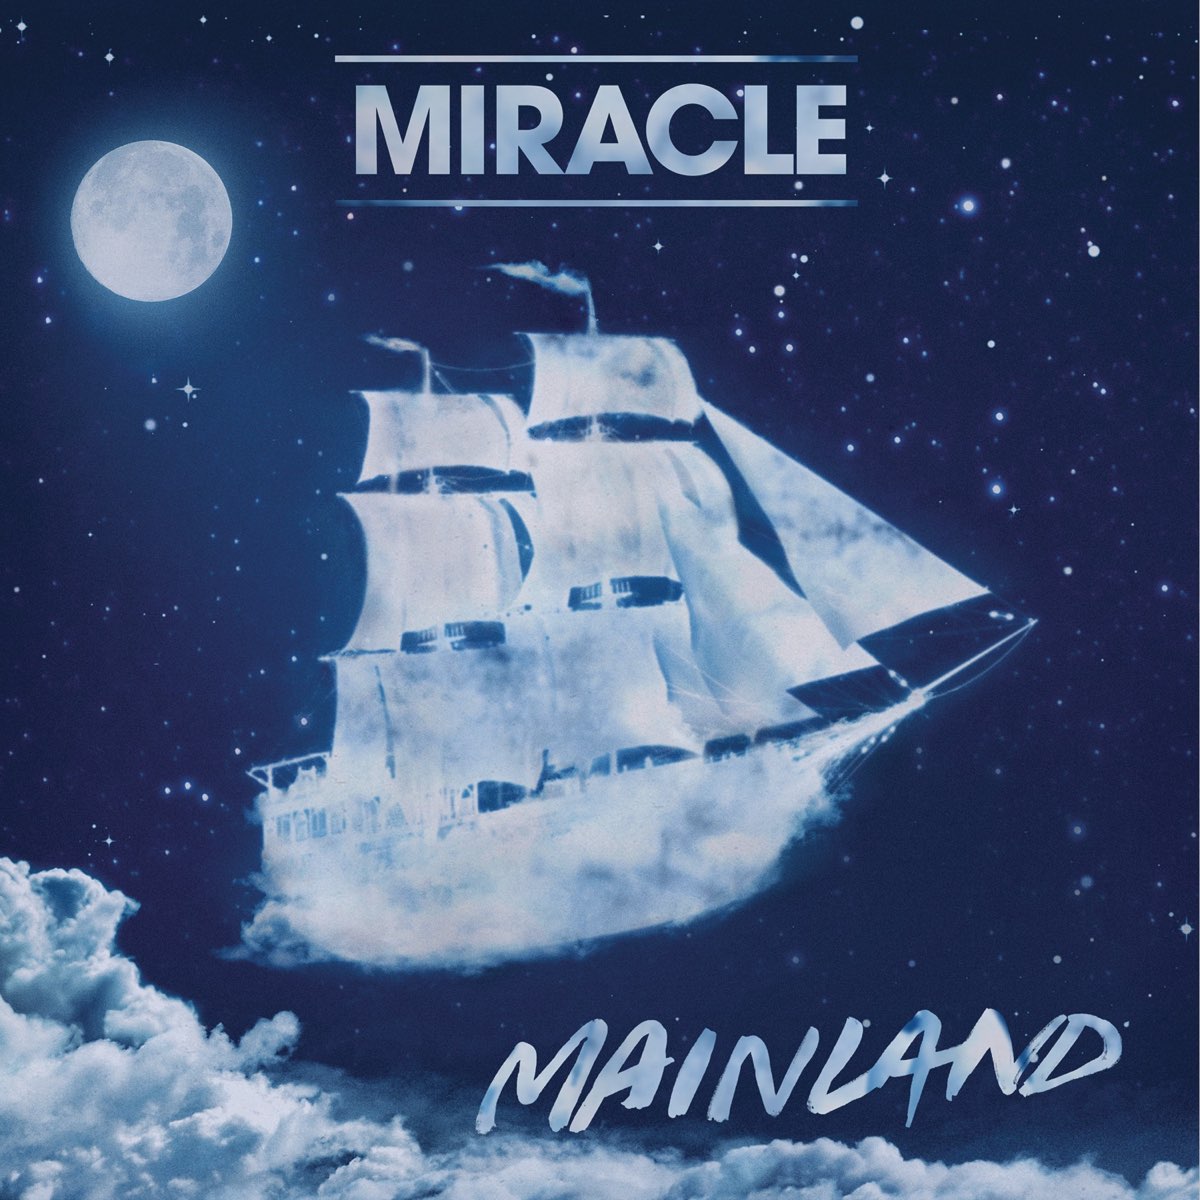 Miracle never. Miracle feat